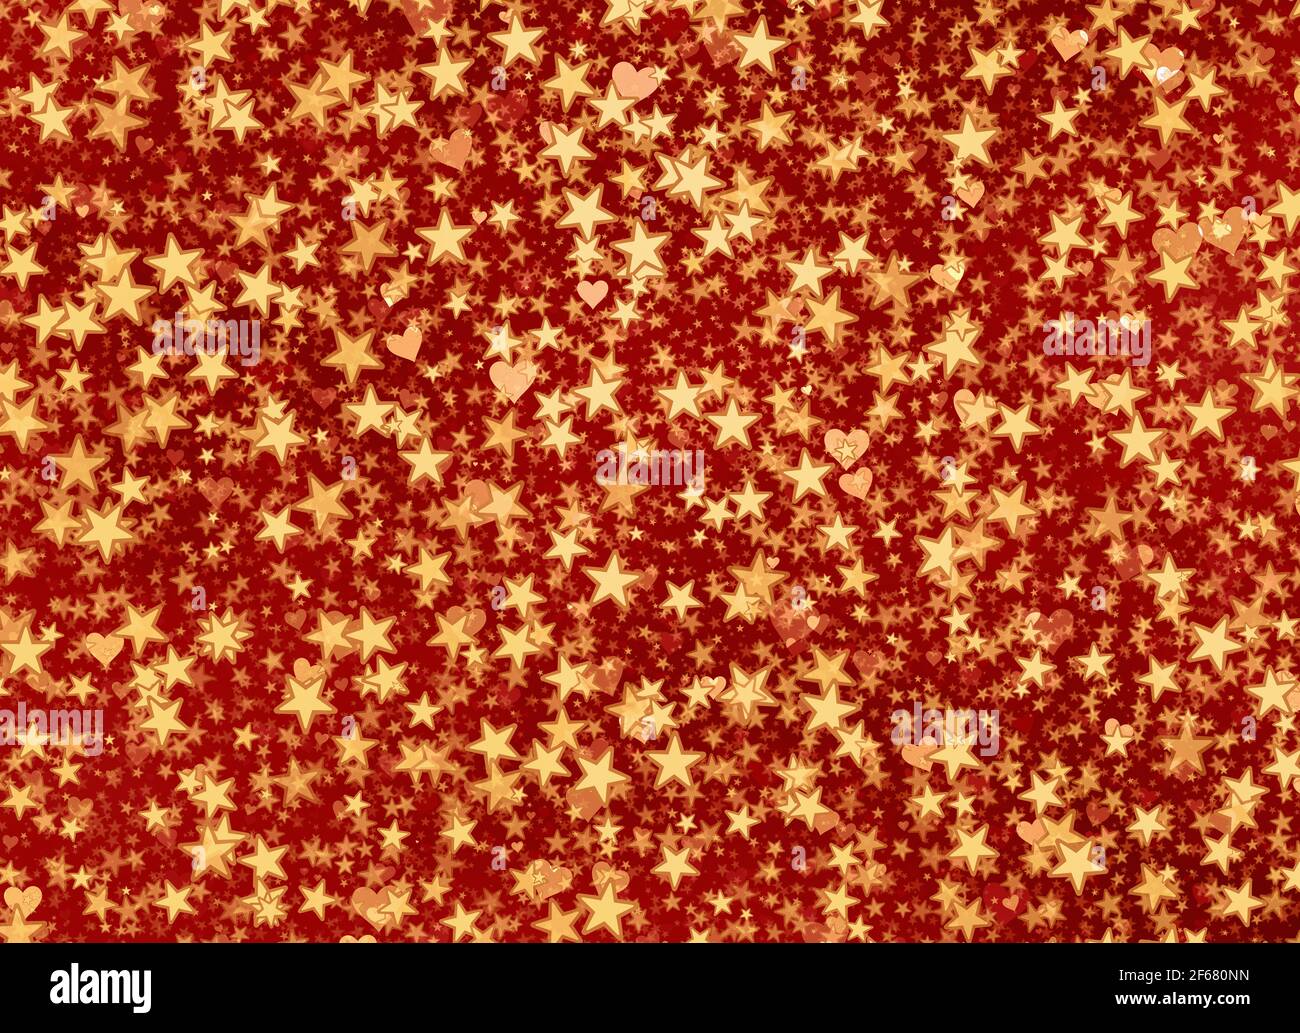 many painted hearts and stars background Stock Photo